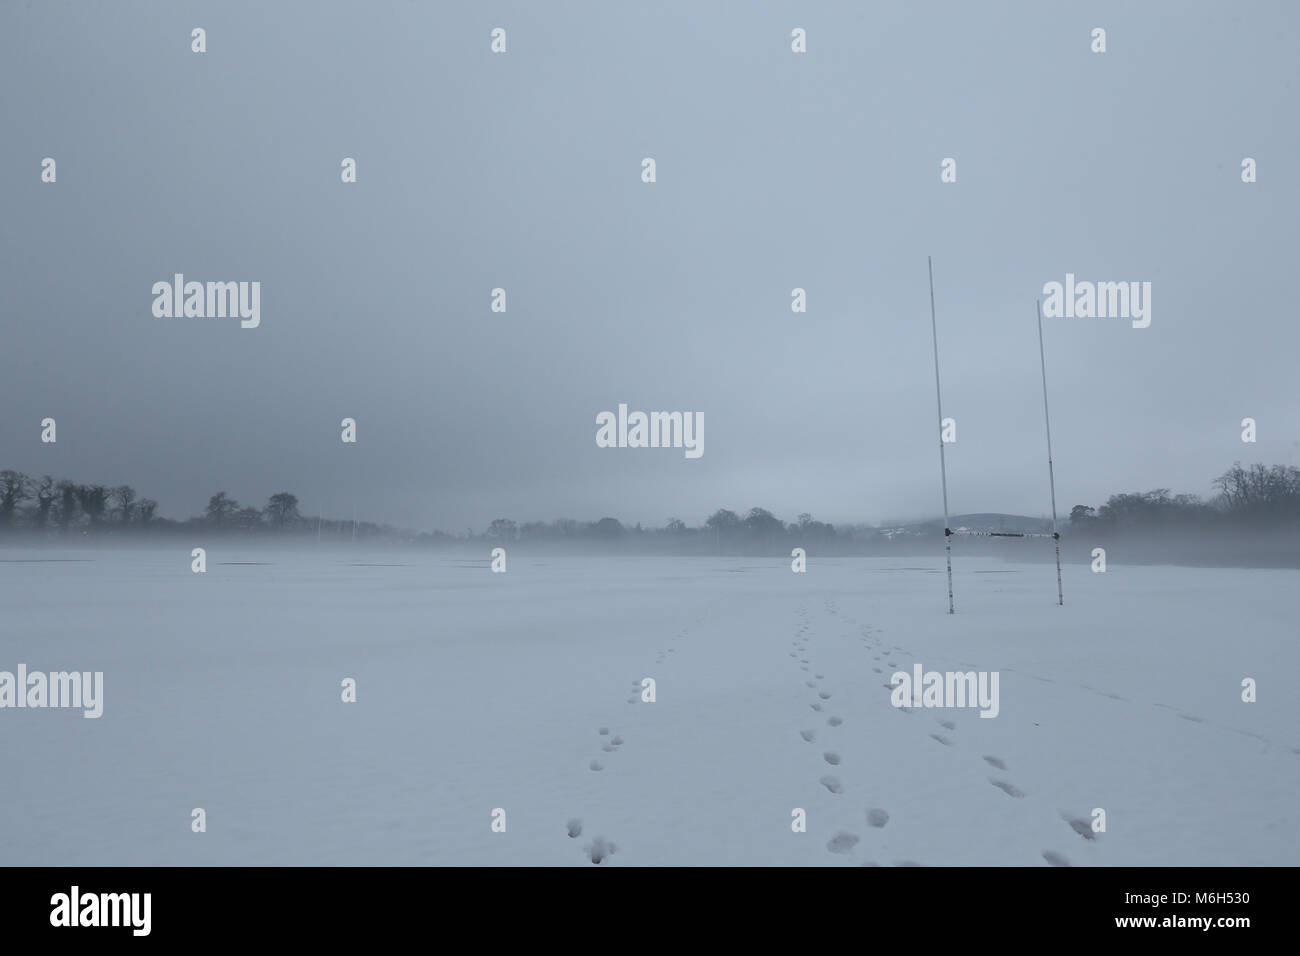 Dublin, Ireland. 4th Mar, 2018. A snow covered GAA pitch in Marlay Park in Dublin during a period of fog. Image from Dublin, Ireland during the aftermath of Storm Emma. Credit: Brendan Donnelly/Alamy Live News Stock Photo